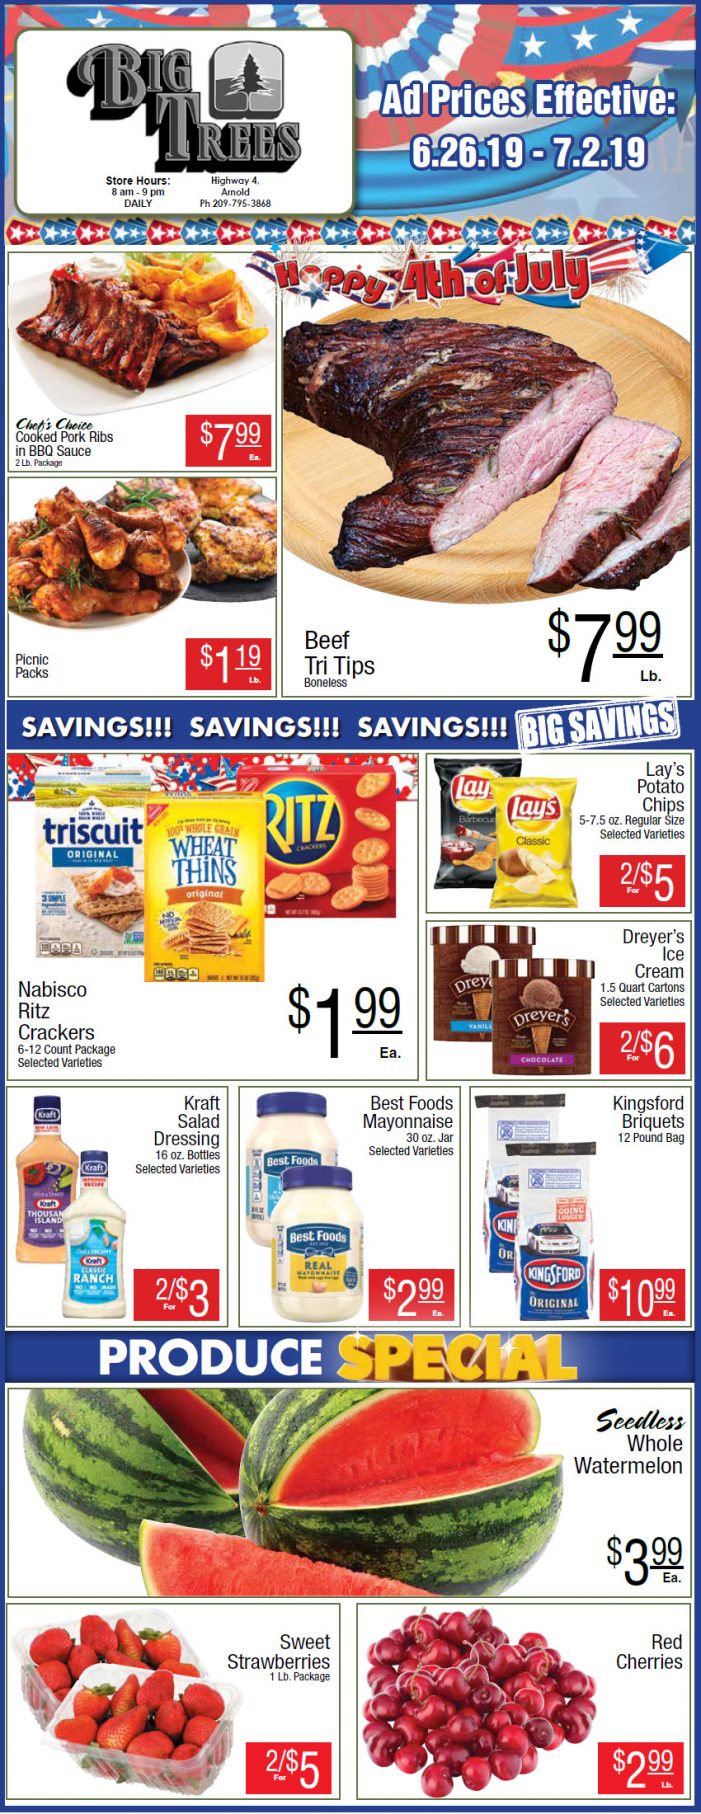 Big Trees Market Weekly Ad & Grocery Specials Through July 2nd!